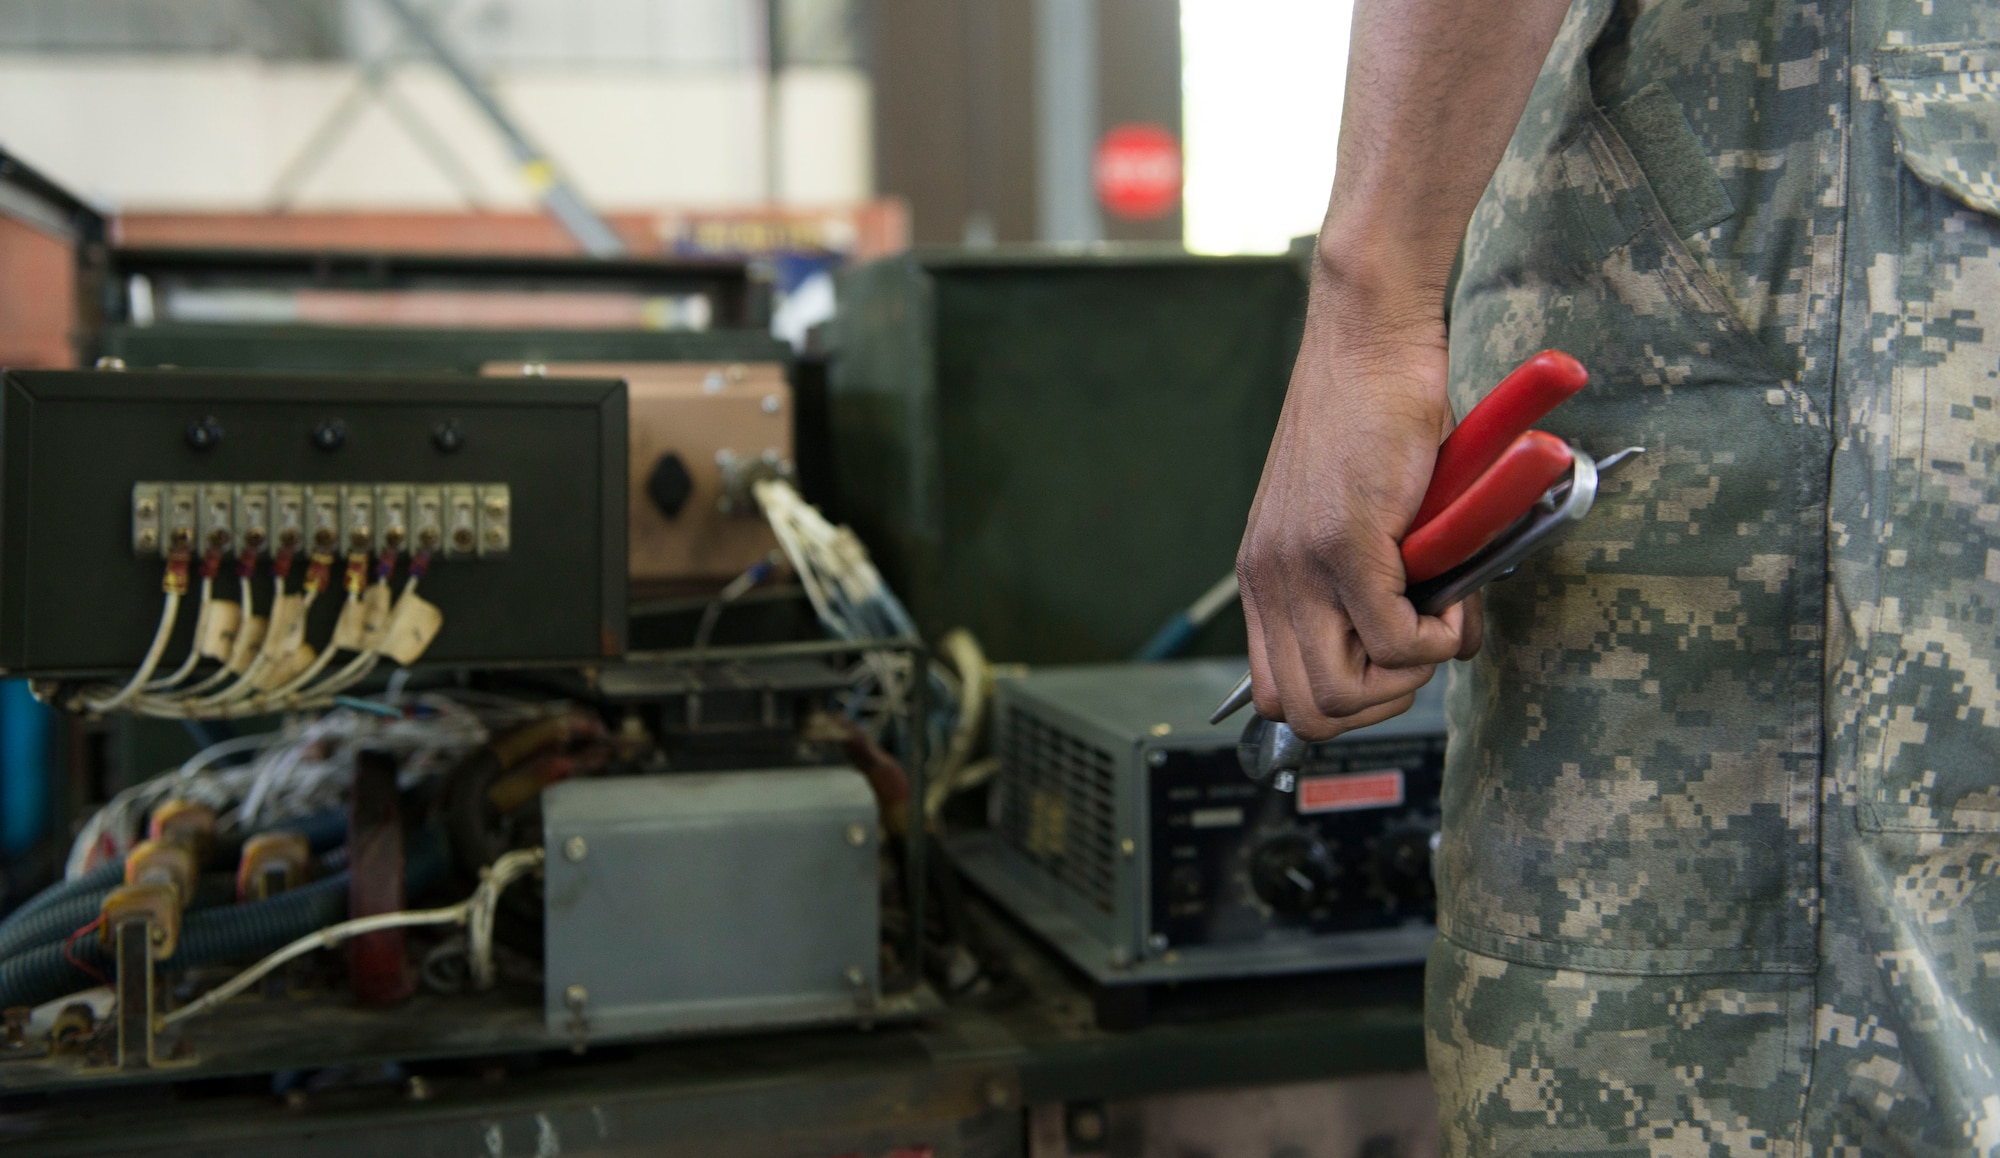 U.S. Air Force Senior Airman Lamar Cotton, 100th Maintenance Squadron aerospace ground equipment journeyman, fixes a diesel generator’s damaged power plane by replacing a damaged harness at RAF Mildenhall, England, May 8, 2018. Aerospace ground equipment Airmen maintain a variety of essential equipment such as generators, heaters and flood lights, all are essential for crew chiefs and other flightline Airmen to do their jobs and keep the mission going. (U.S. Air Force photo by Airman 1st Class Alexandria Lee)